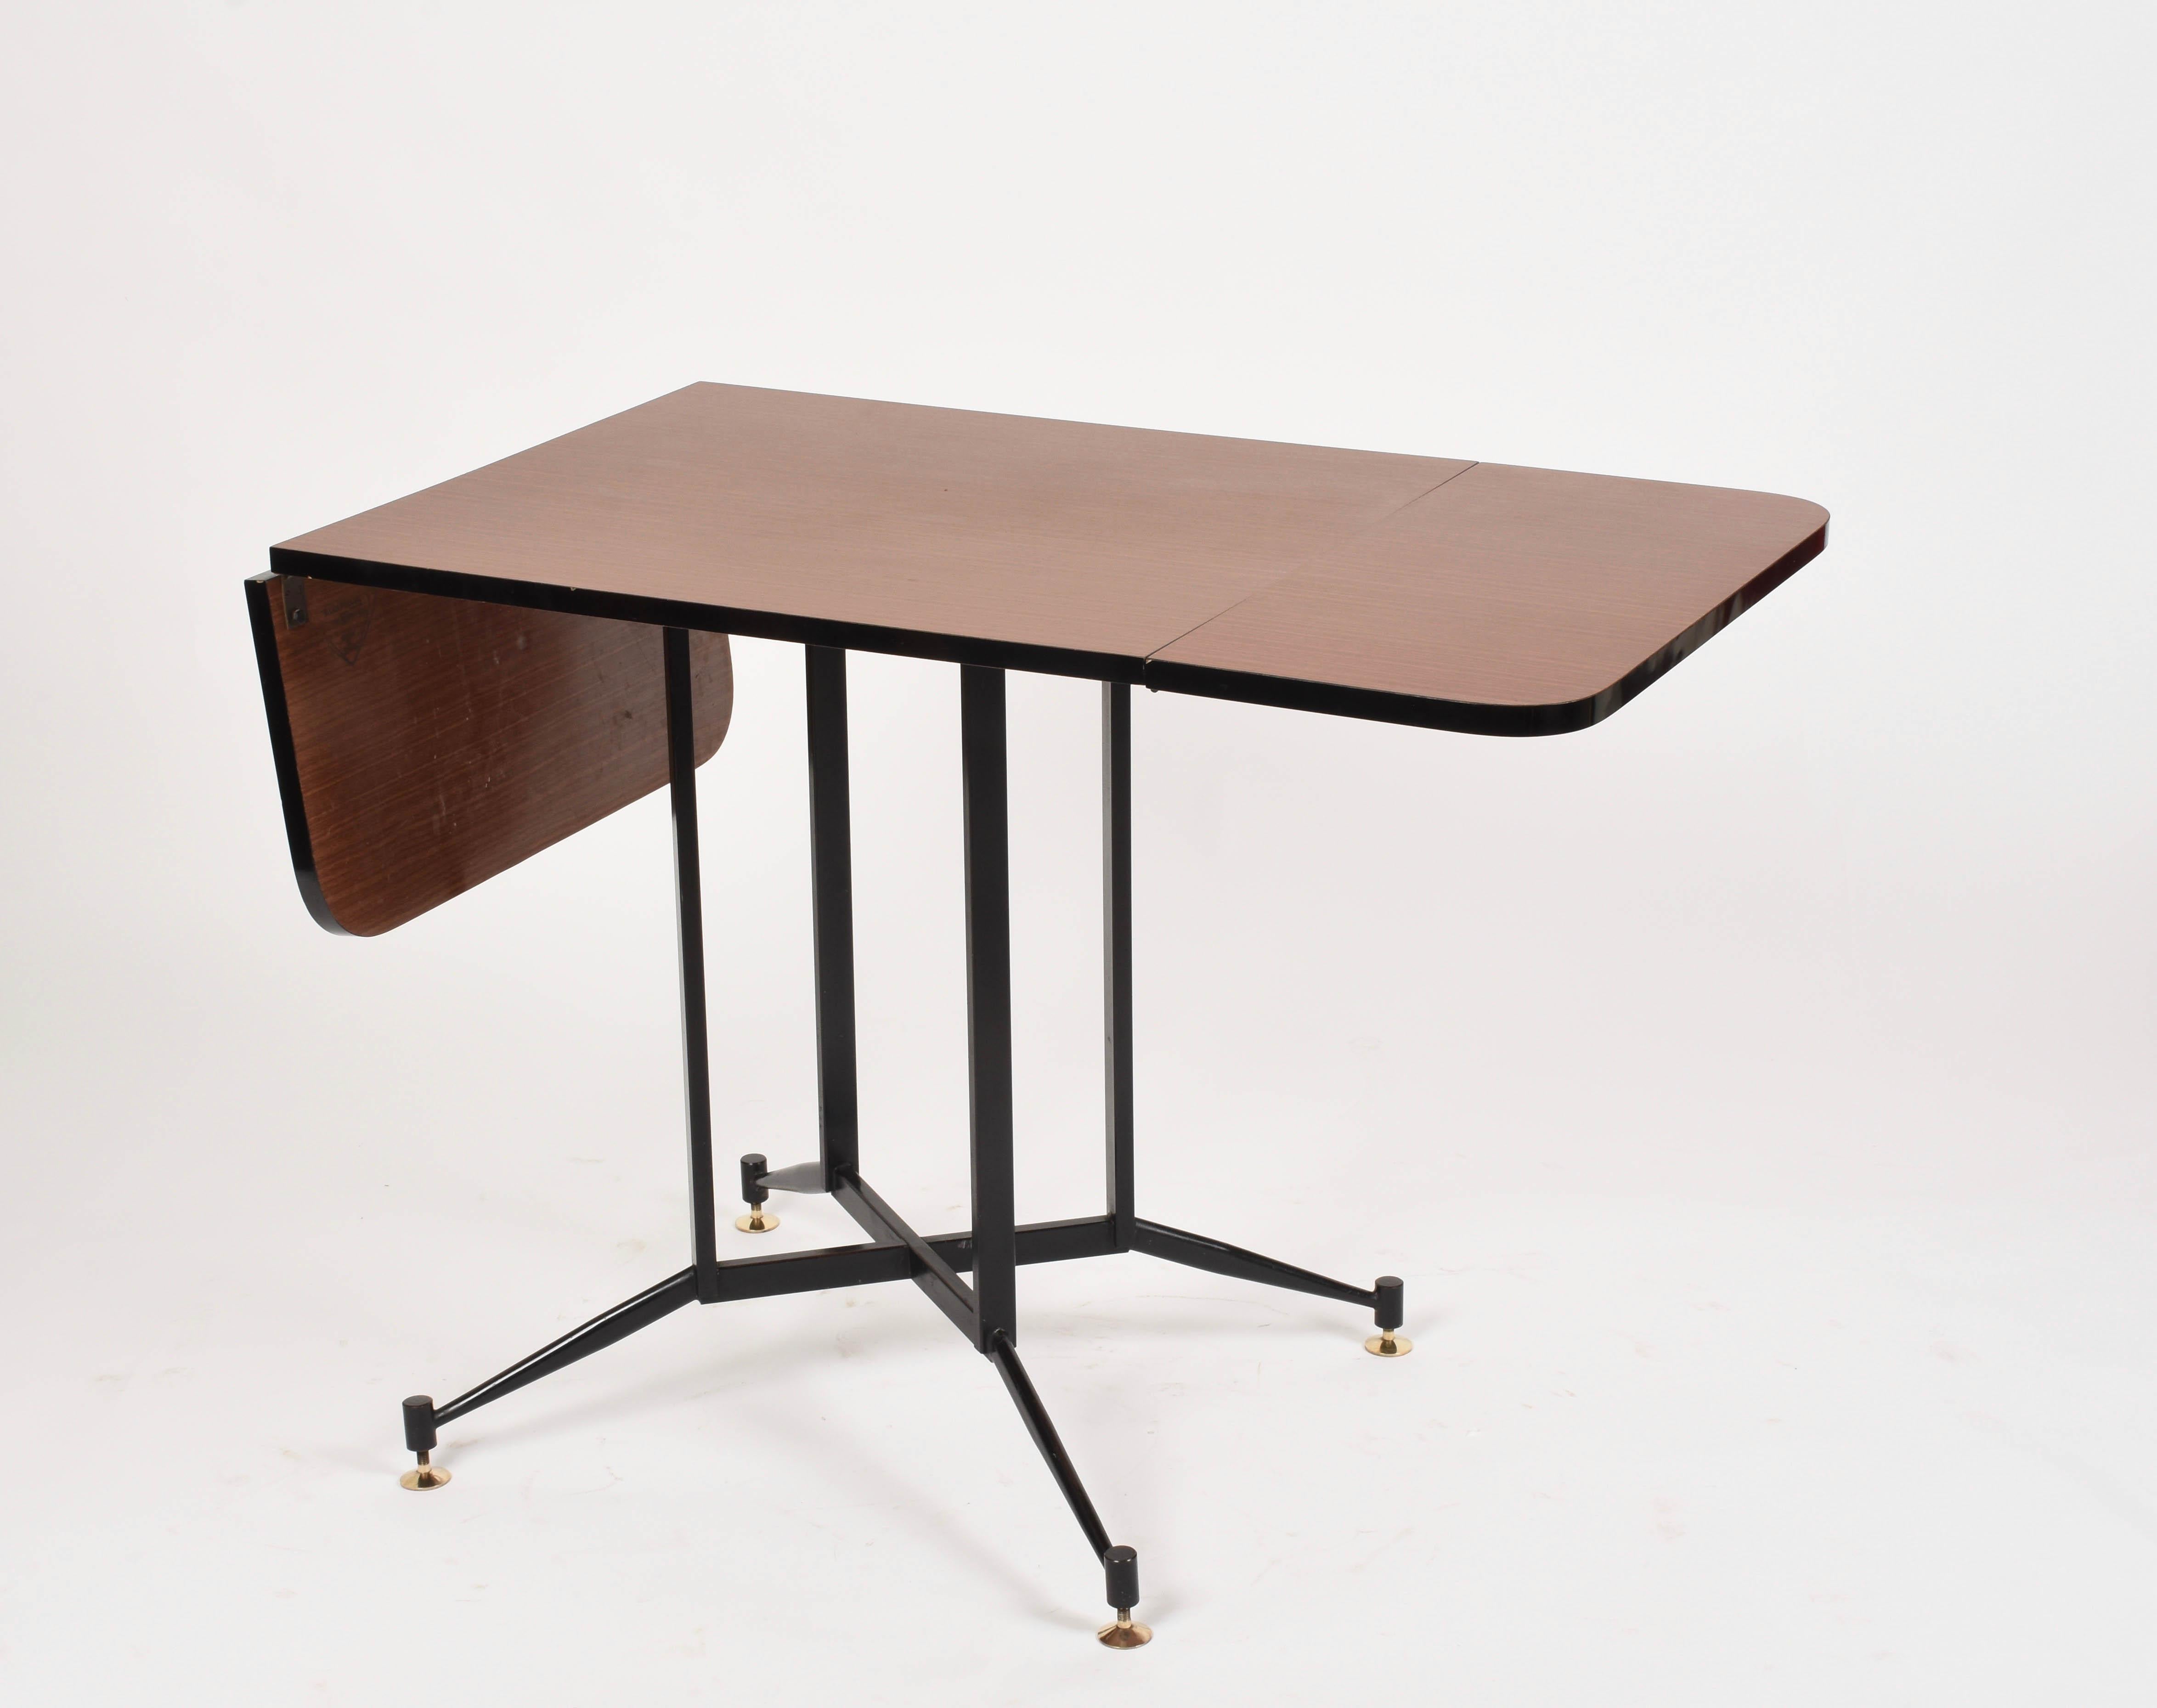 Gardella Midcentury Formica Steel and Brass Table, Laminati Plastici Italy 1950s For Sale 1